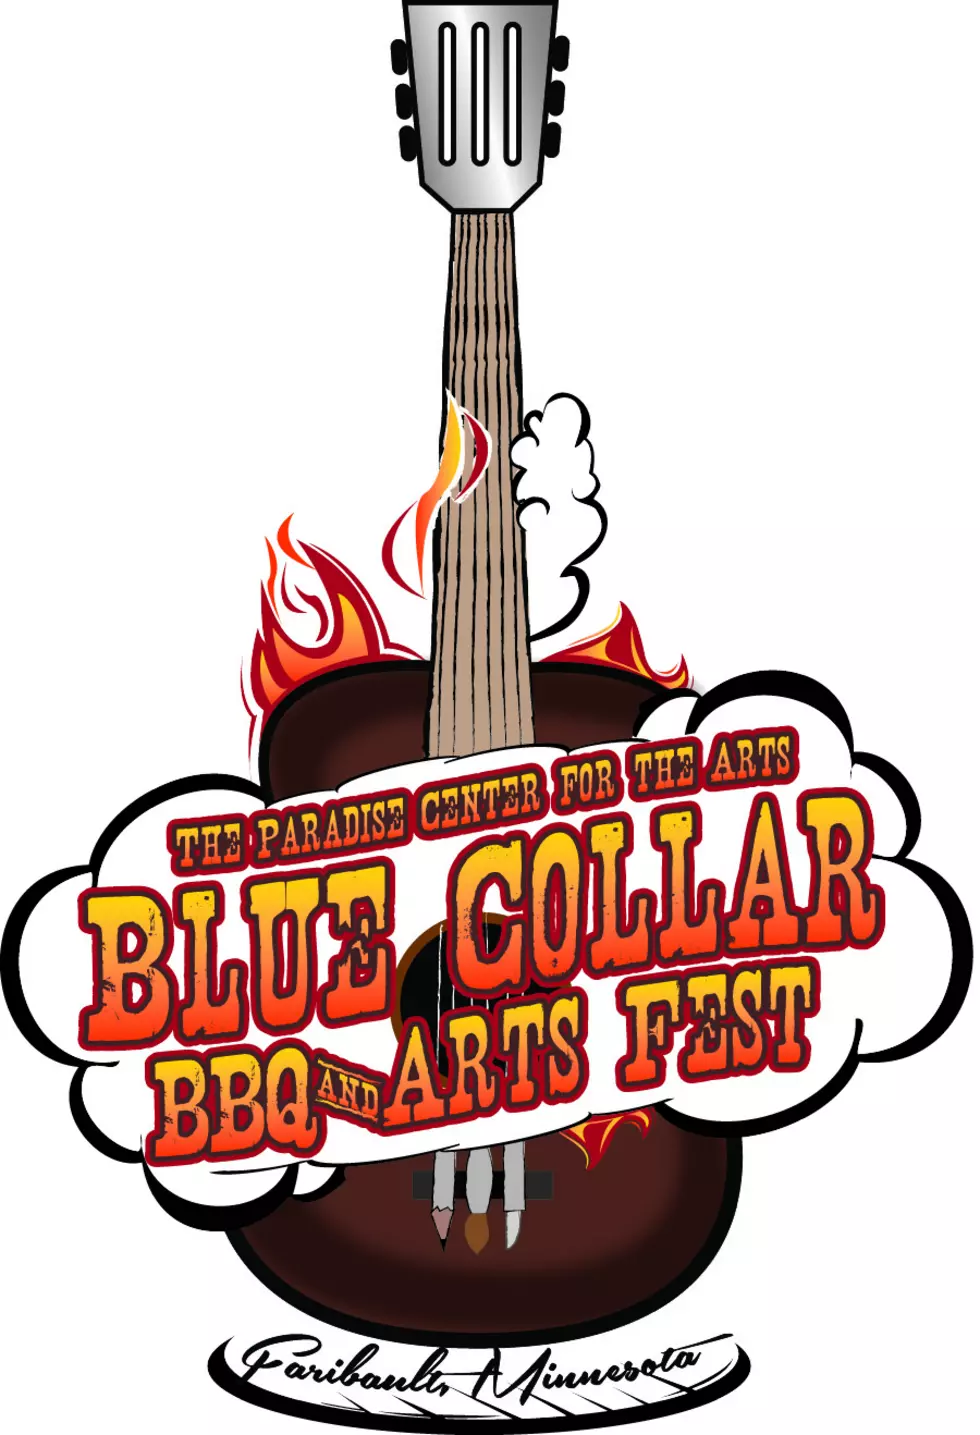 8th Annual Blue Collar BBQ and Arts Fest This Weekend